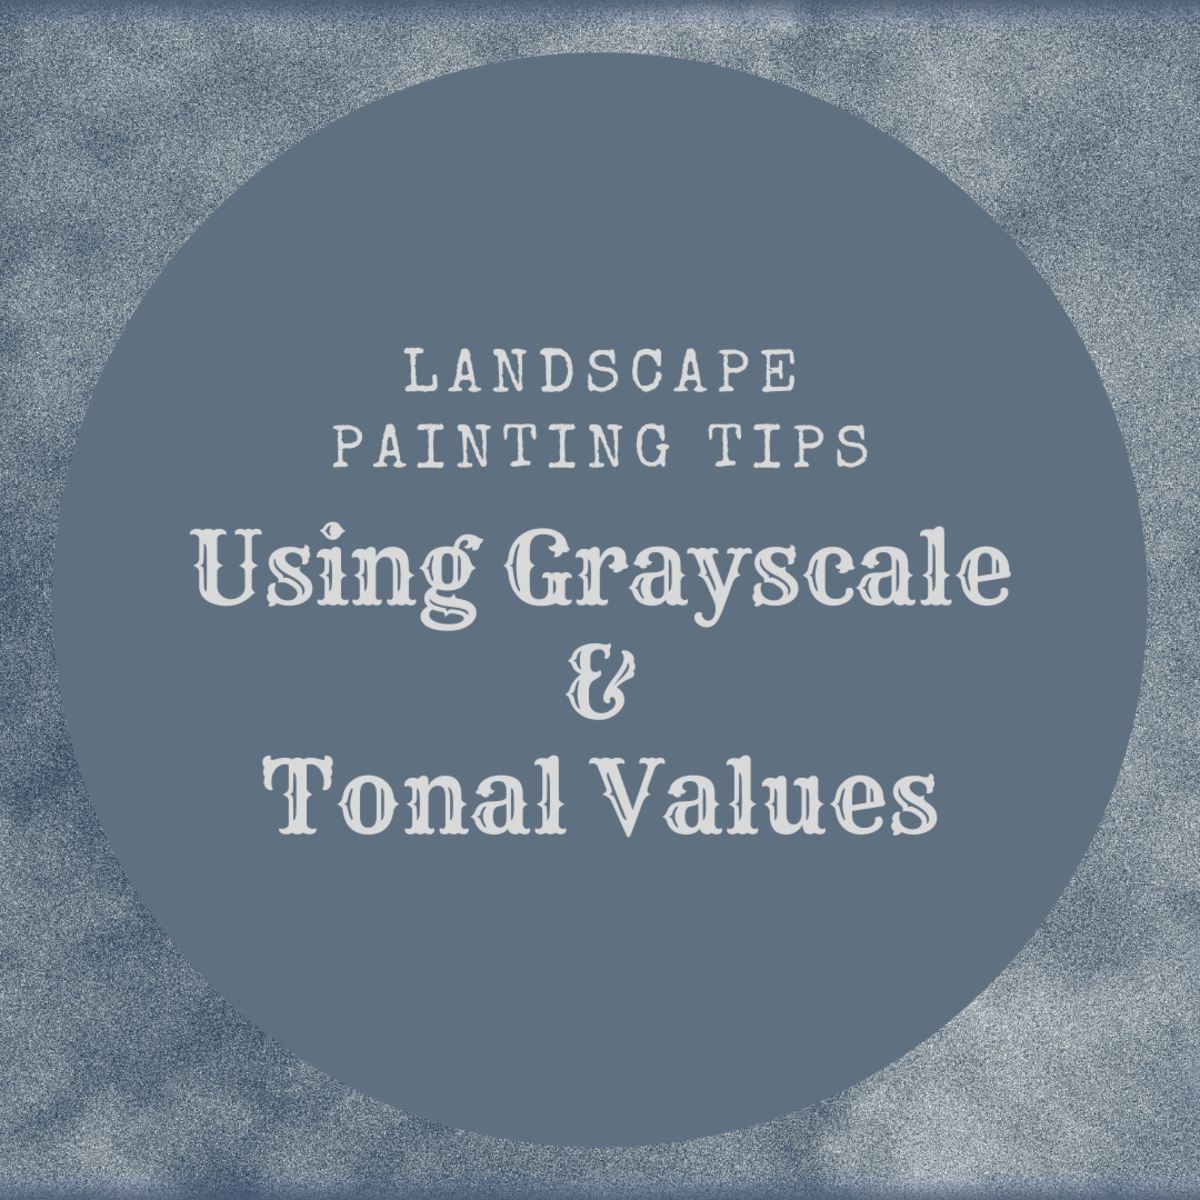 Using Grayscale and Tonal Values in Landscape Painting